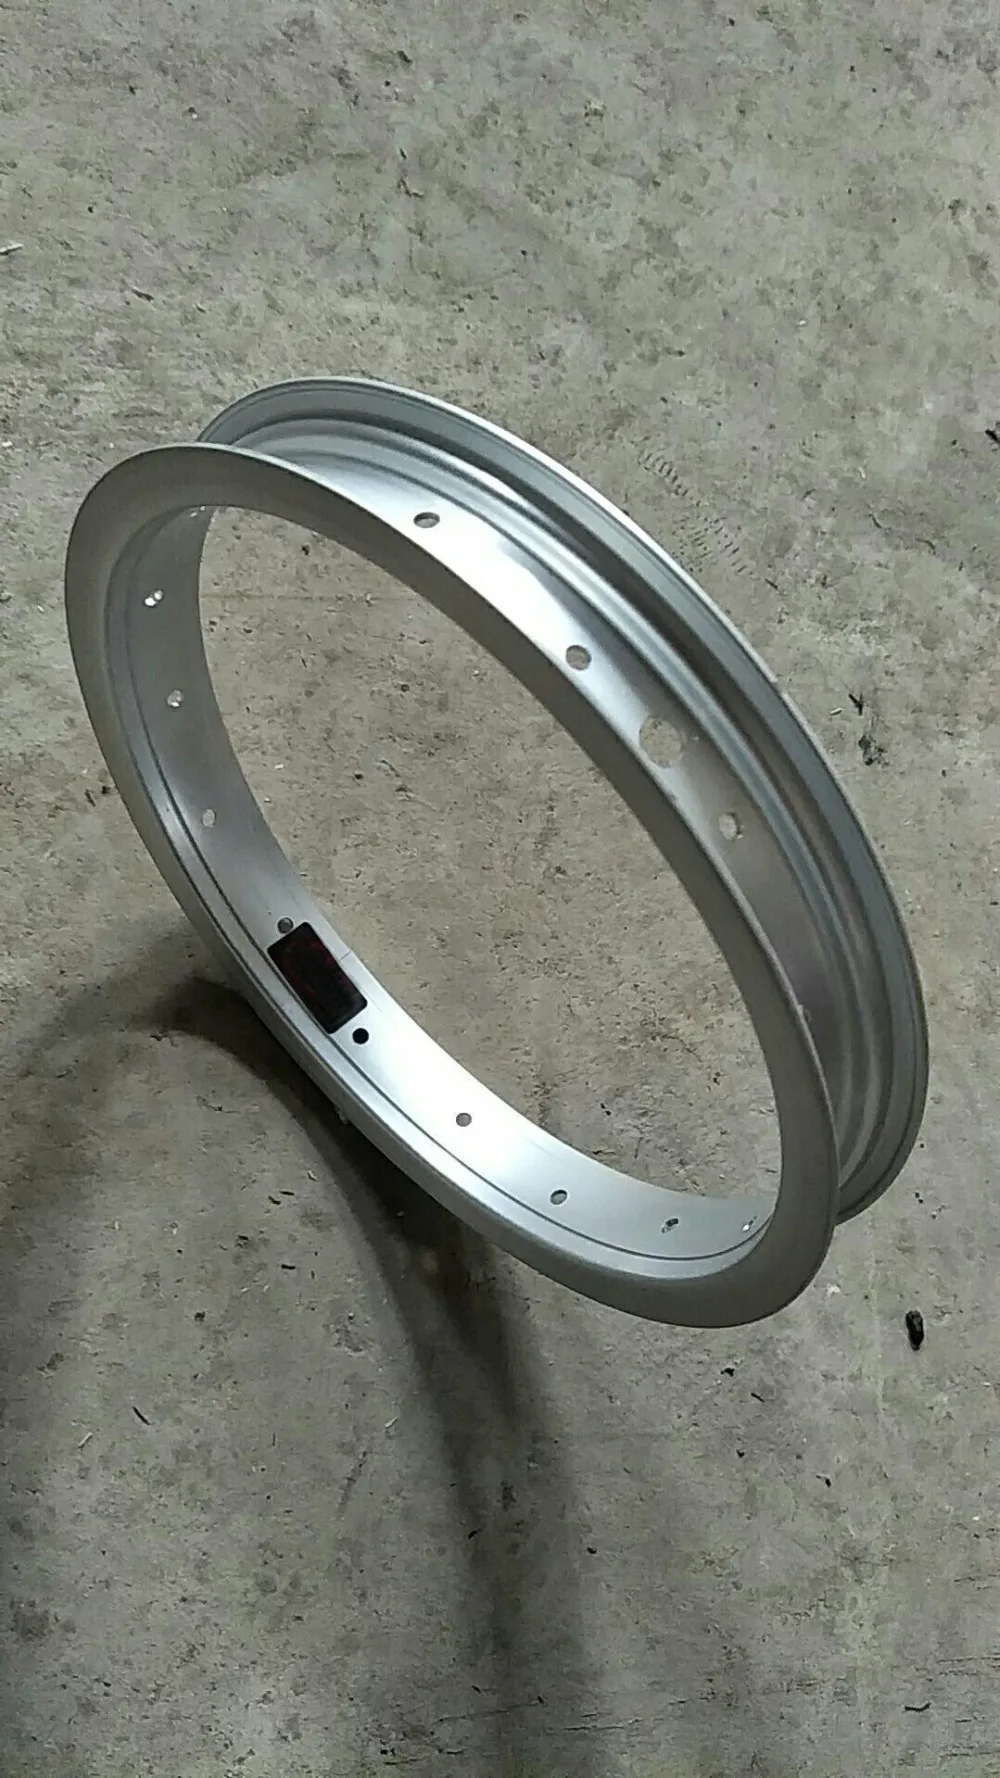 12 inch bicycle rims